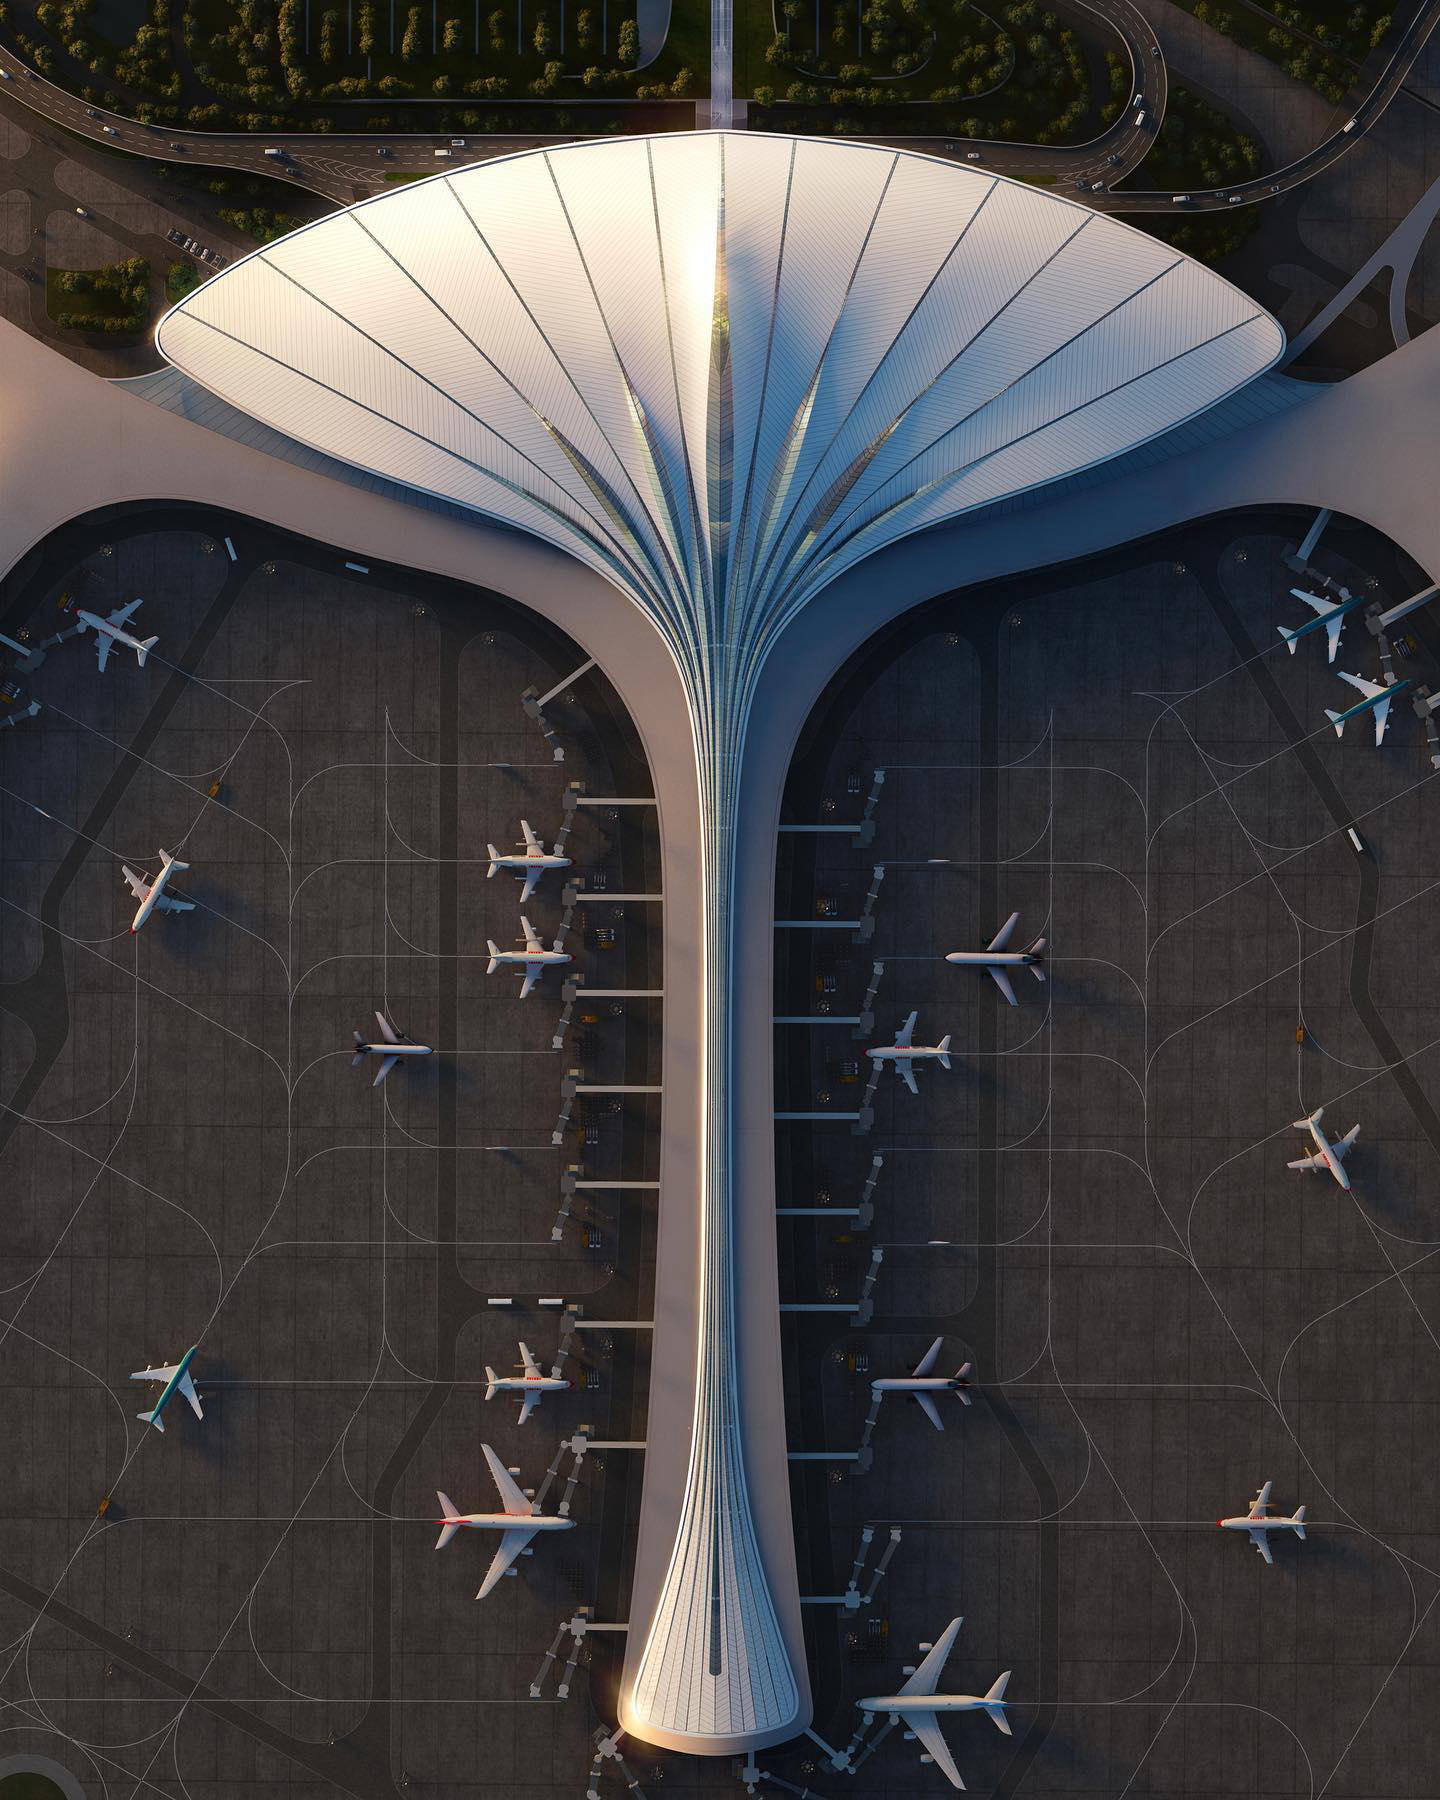 #madarchitects unveils its organic design for the new terminal for changchun airport in #china